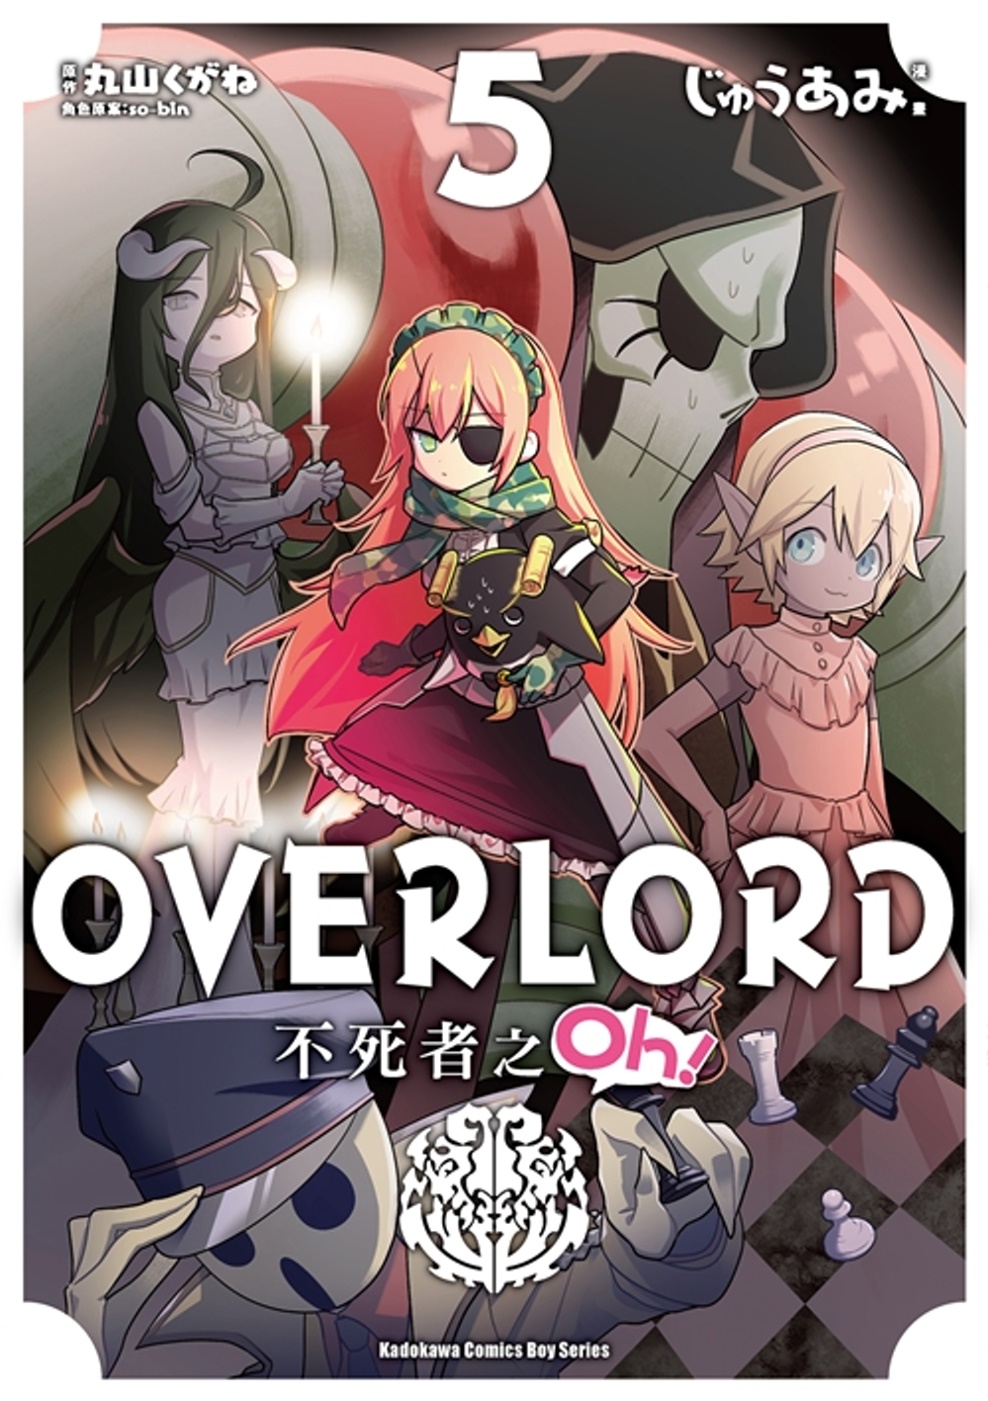 OVERLORD 不死者之Oh！ (5)